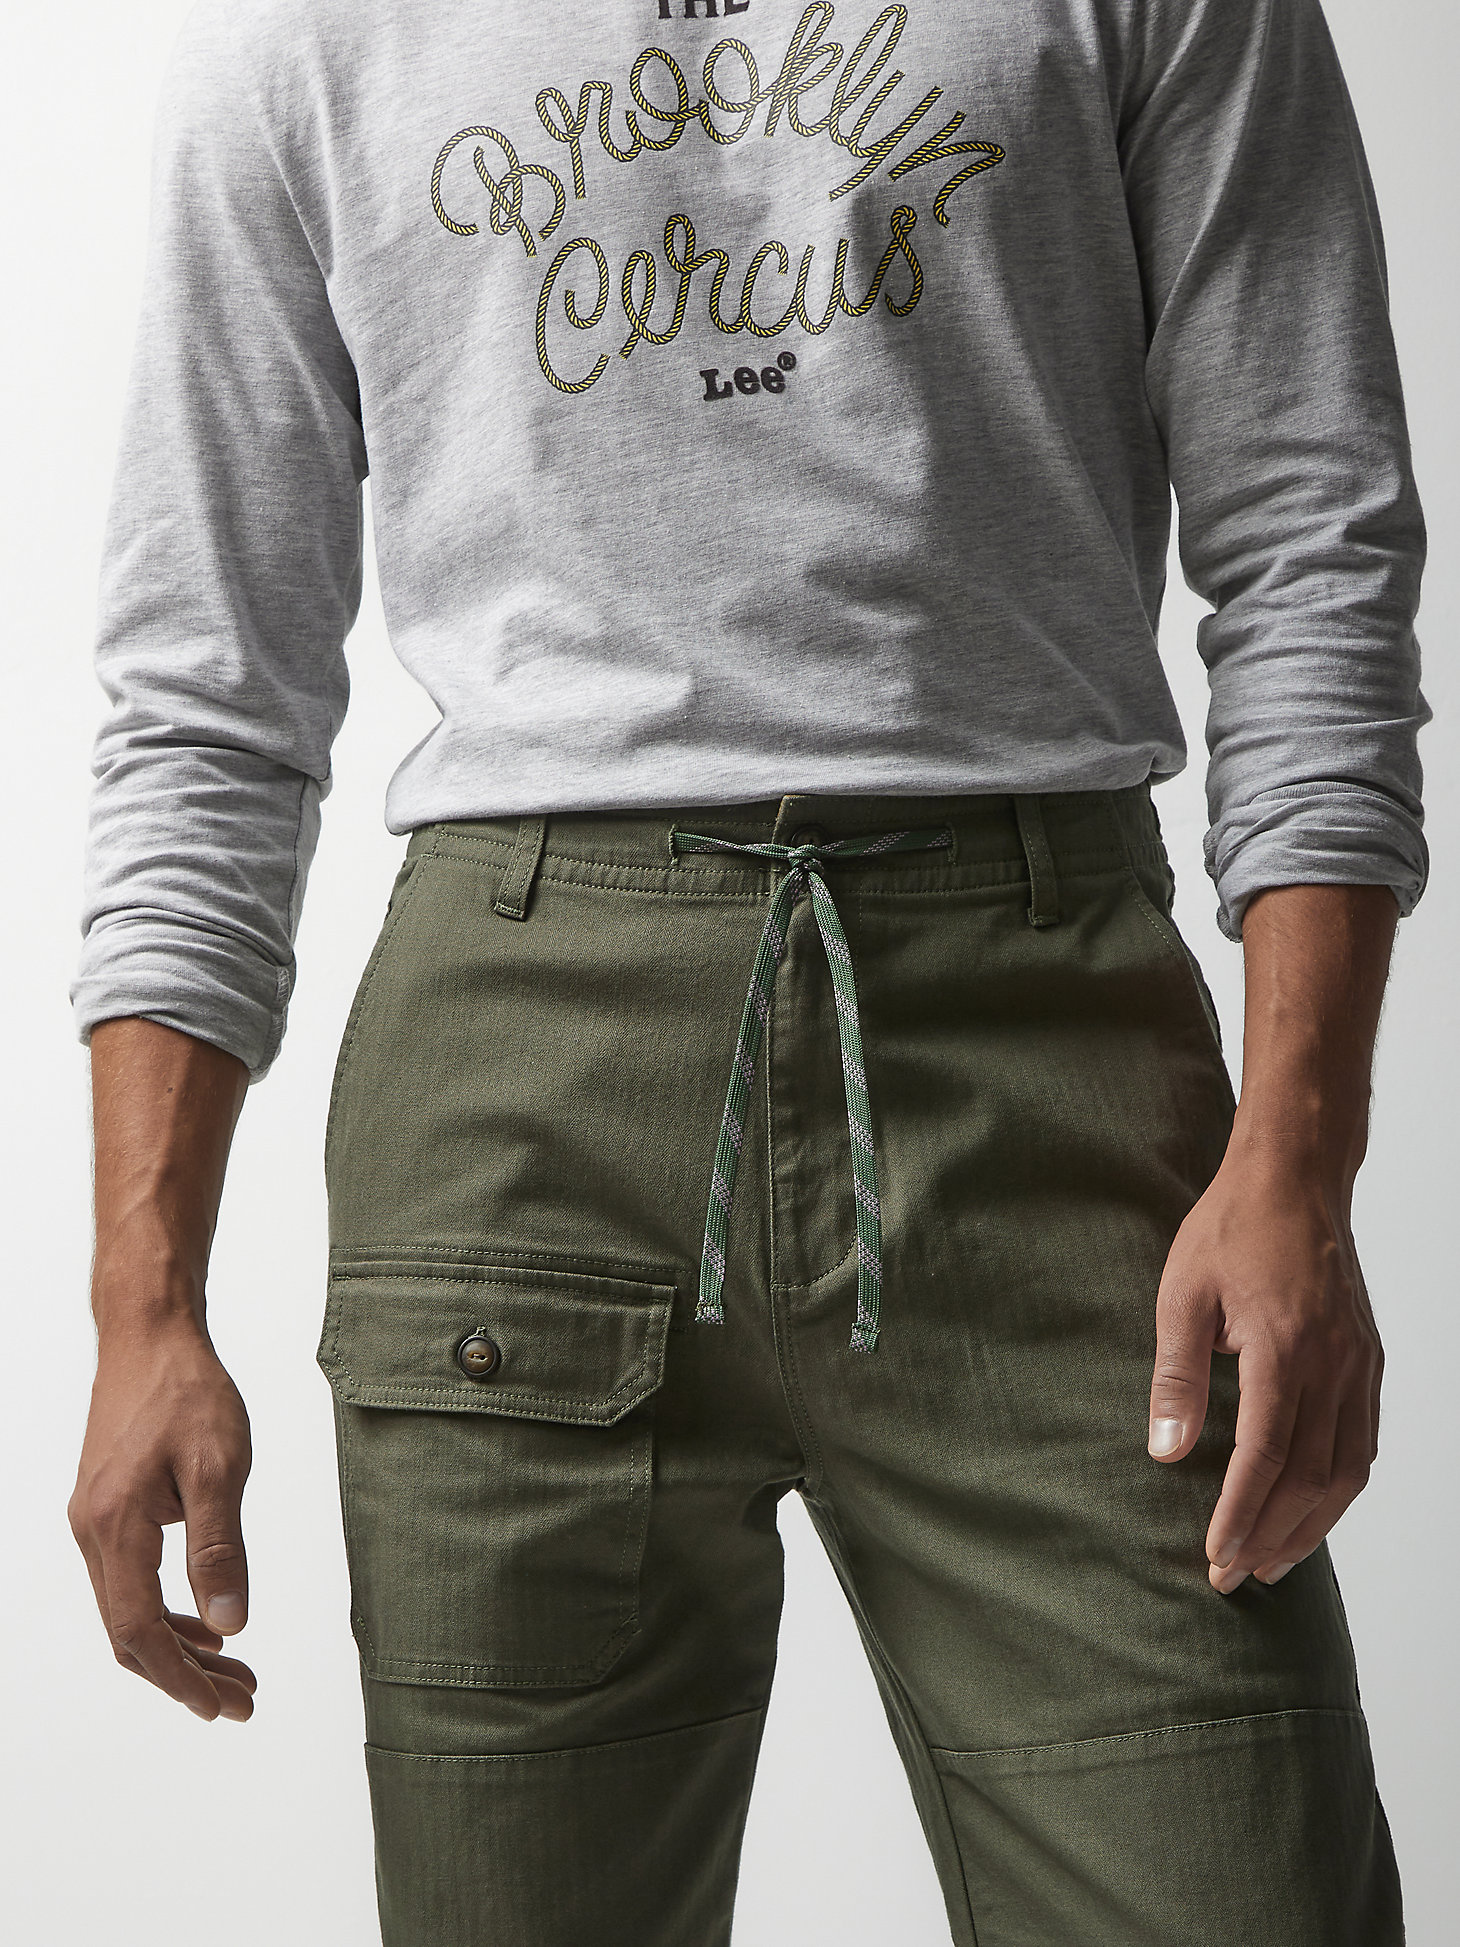 Lee® x The Brooklyn Circus® Drawstring Pant in Muted Olive alternative view 4